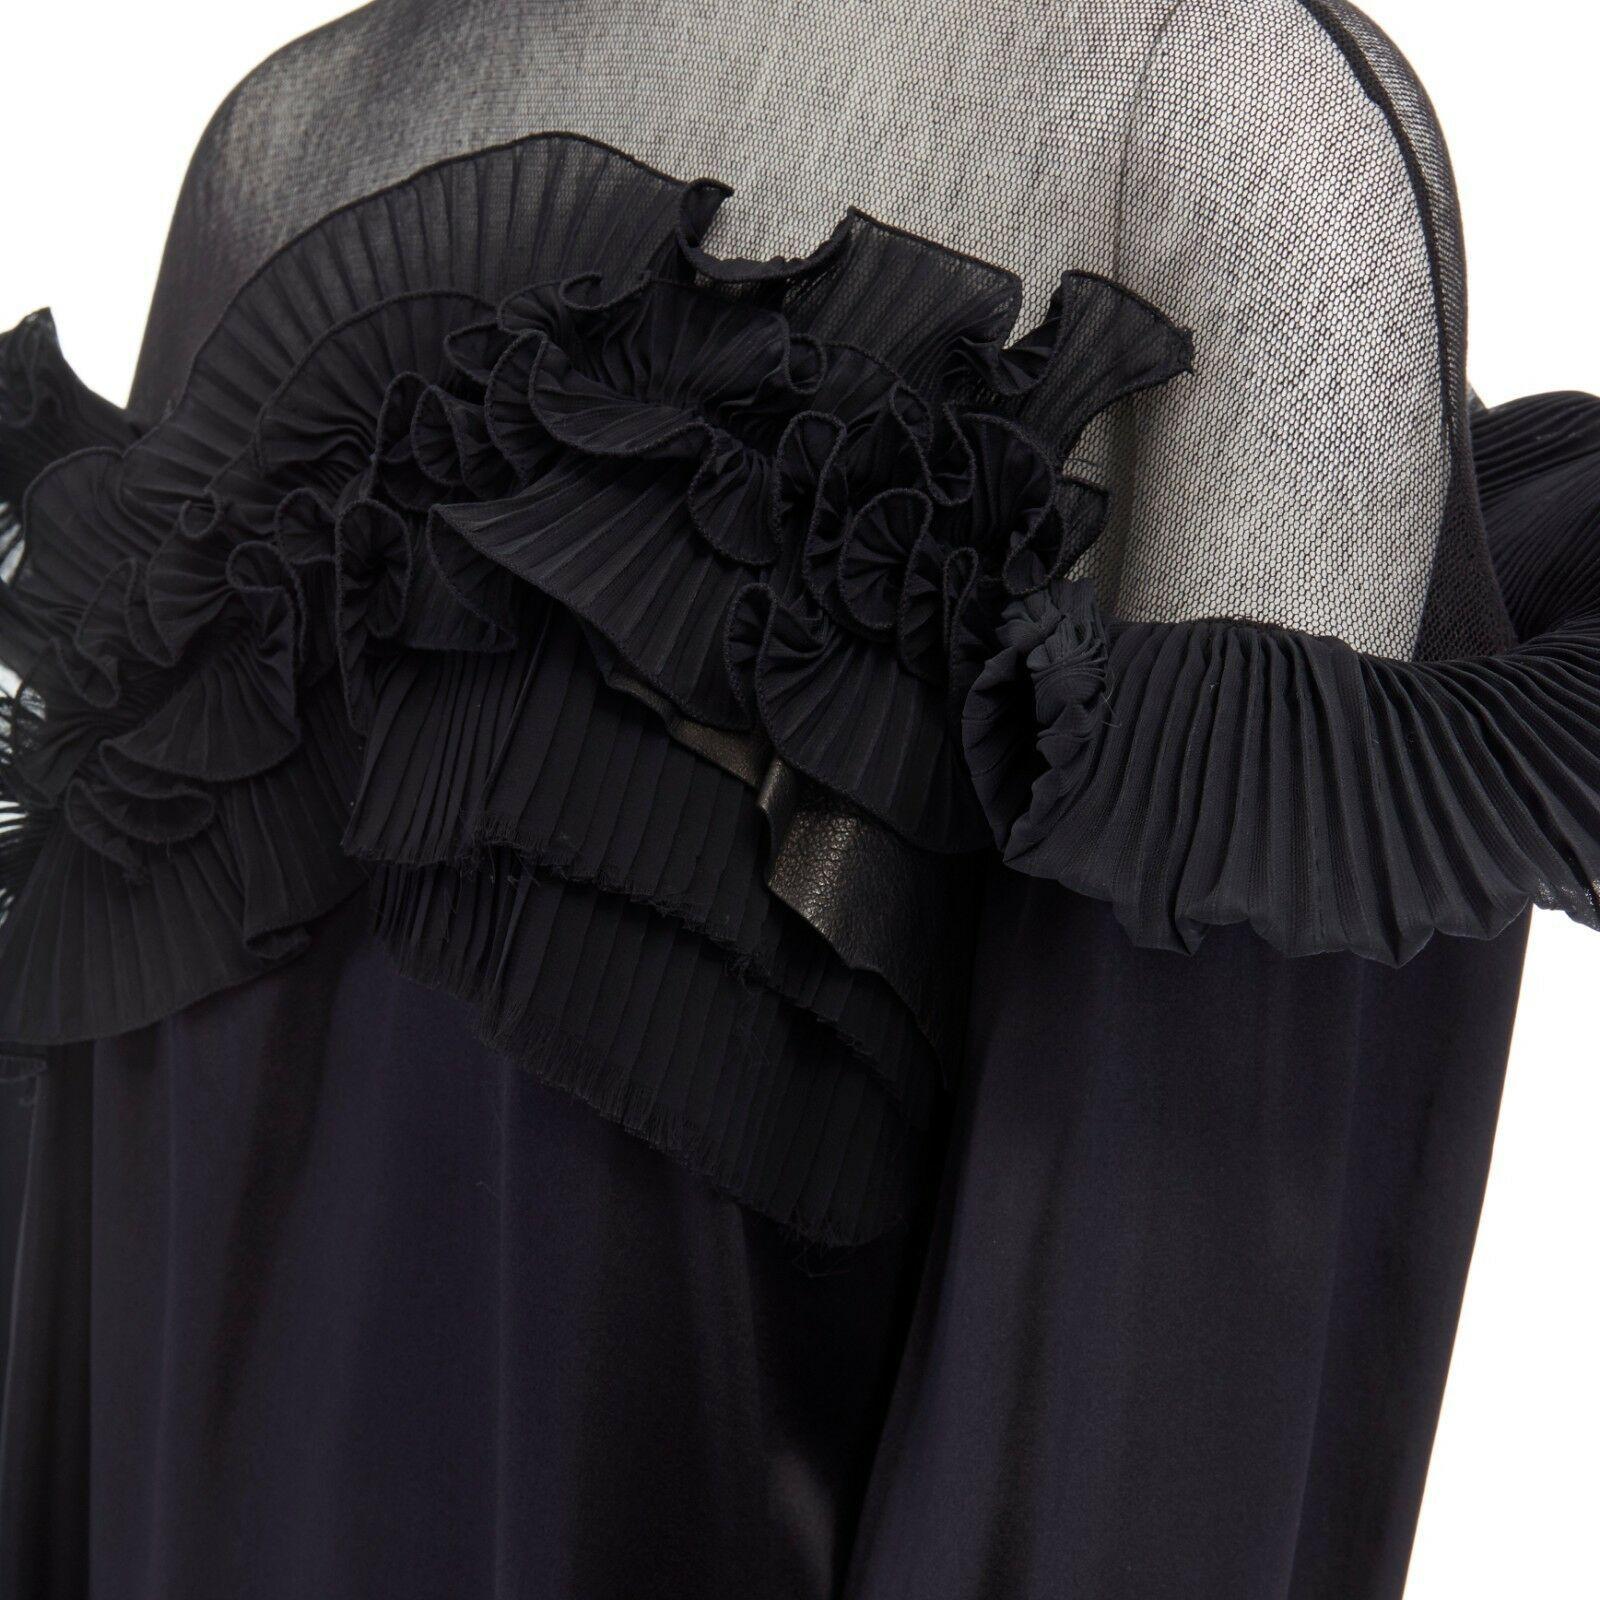 runway GIVENCHY TISCI AW08 black pleated ruffle lace sheer yoke silk top FR36

GIVENCHY BY RICCARDO TISCI
FROM THE FALL WINTER 2008 RUNWAY100% silk. Black. 
Pleated ruffle volume, lace and leather panel trimming across chest. 
Sheer knitted